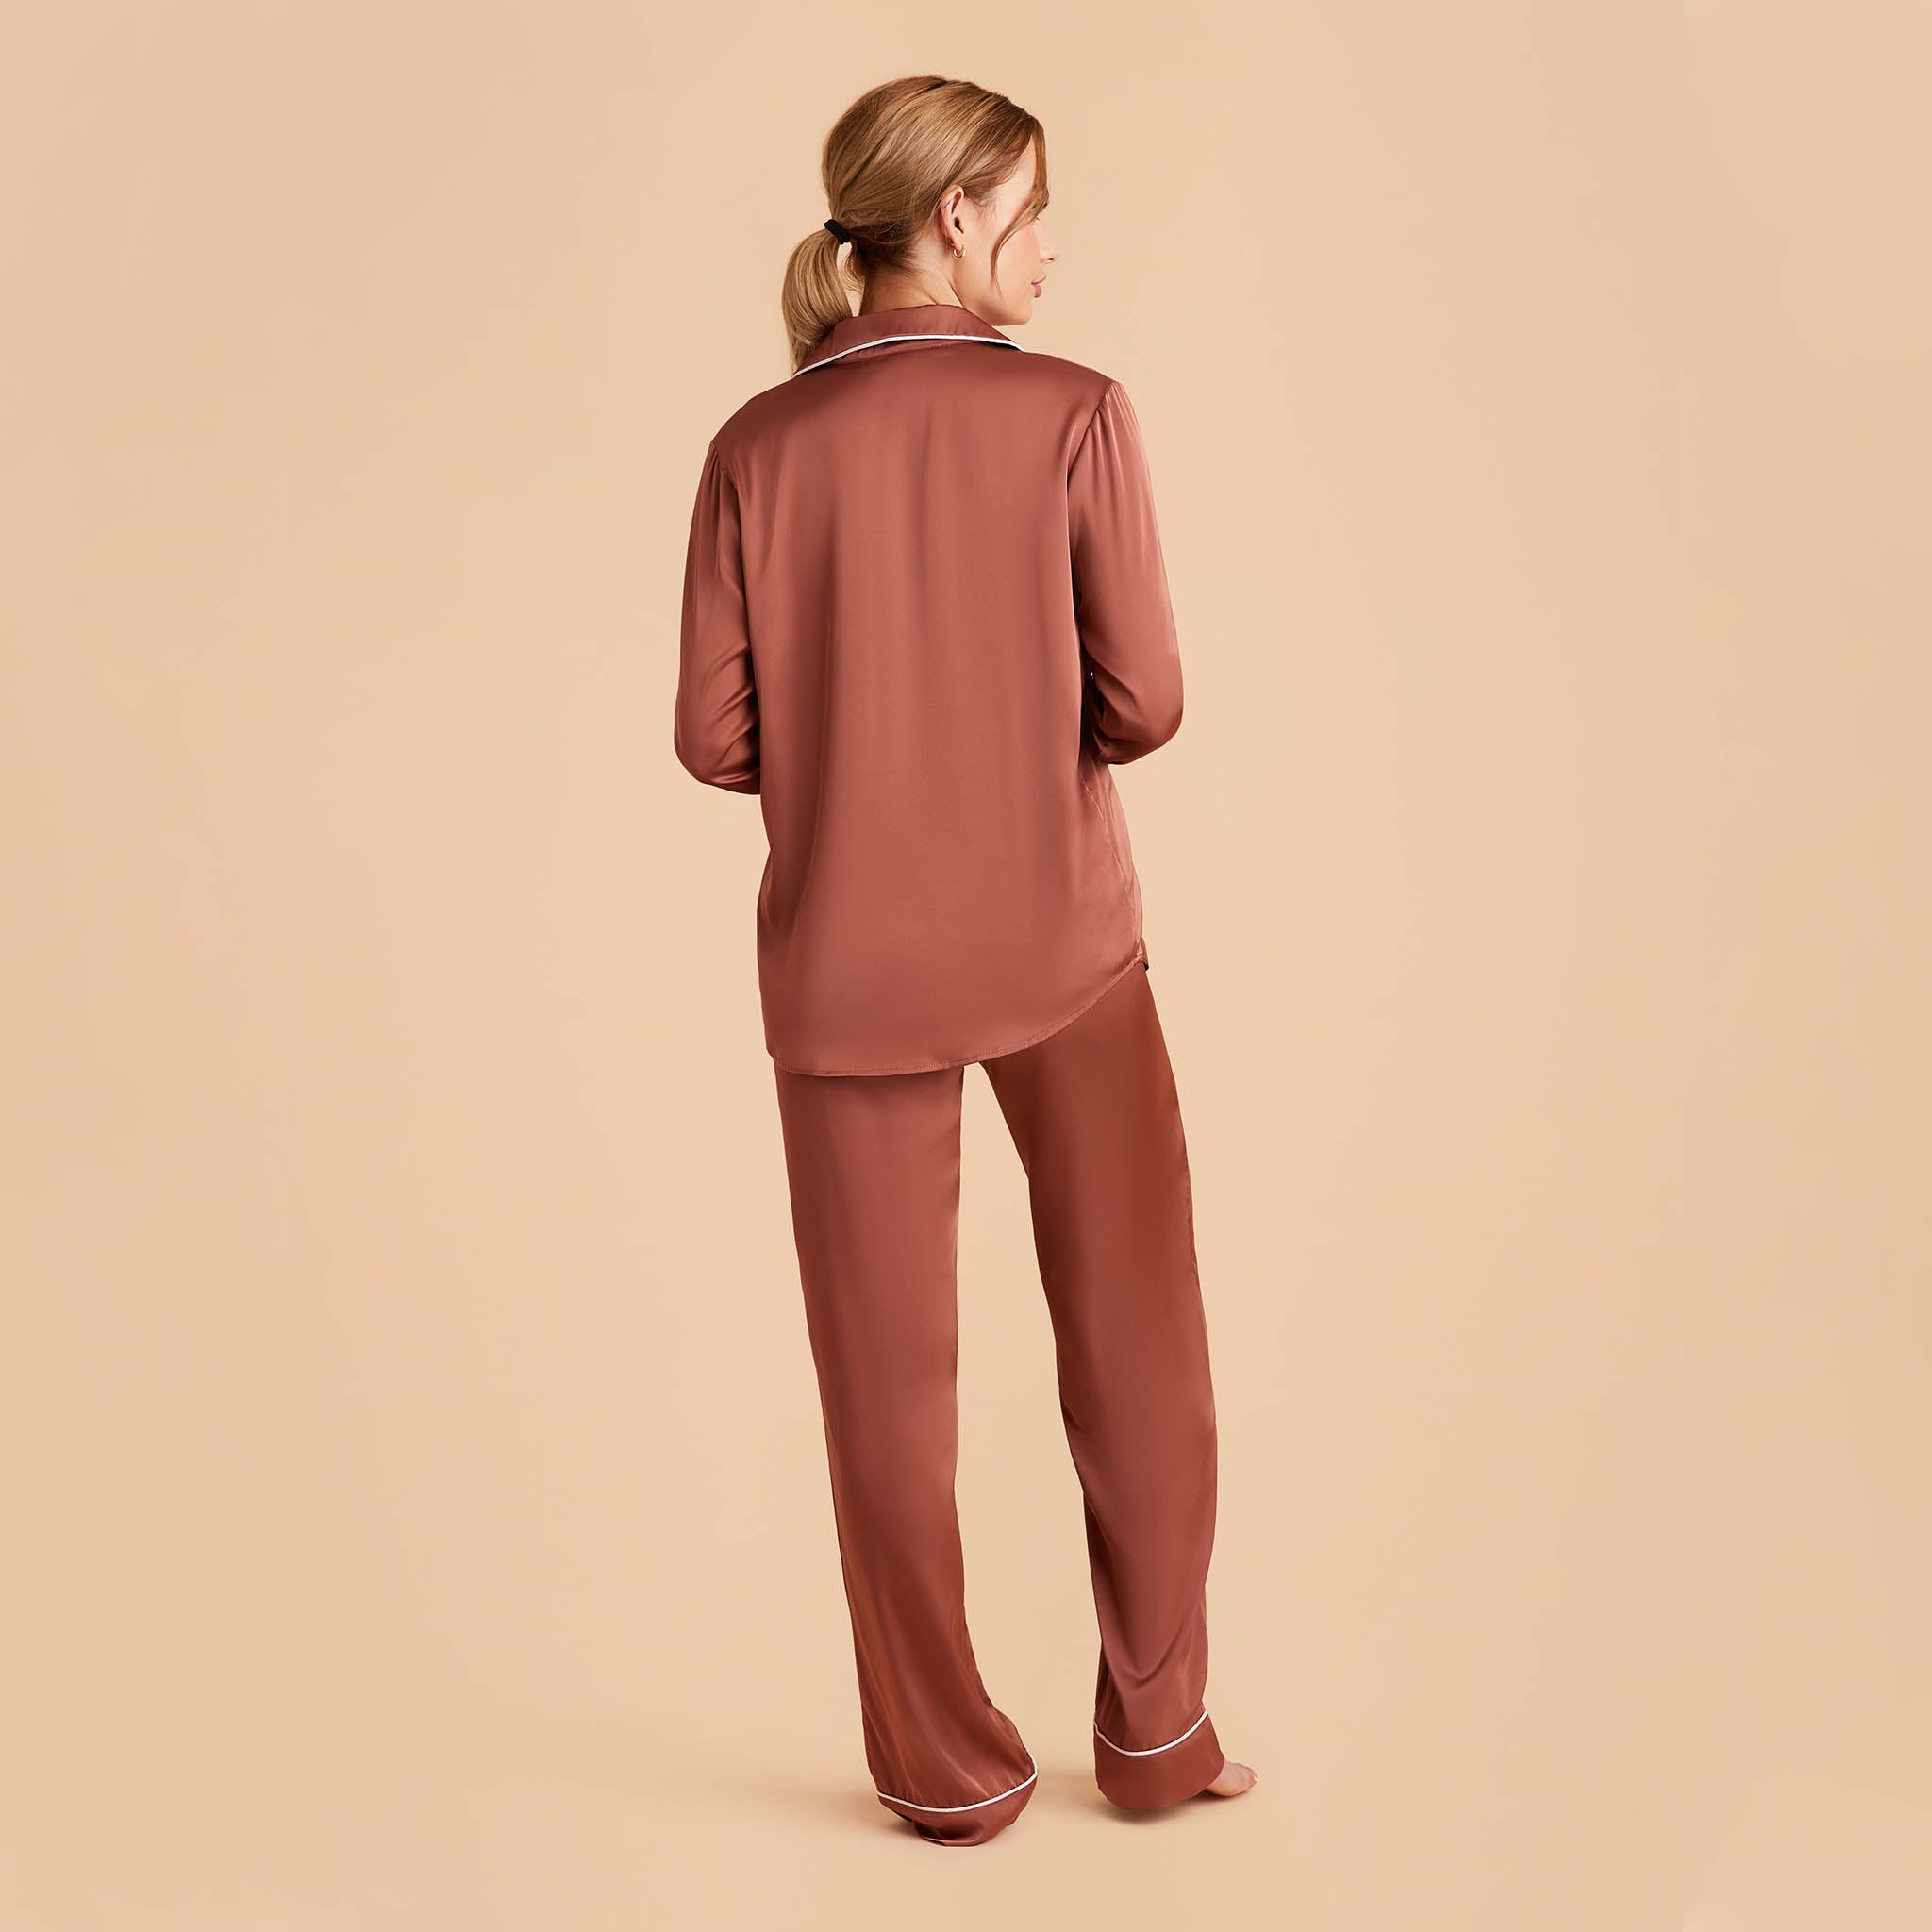 Jonny Satin Long Sleeve Pajama Top With White Piping in desert rose, back view